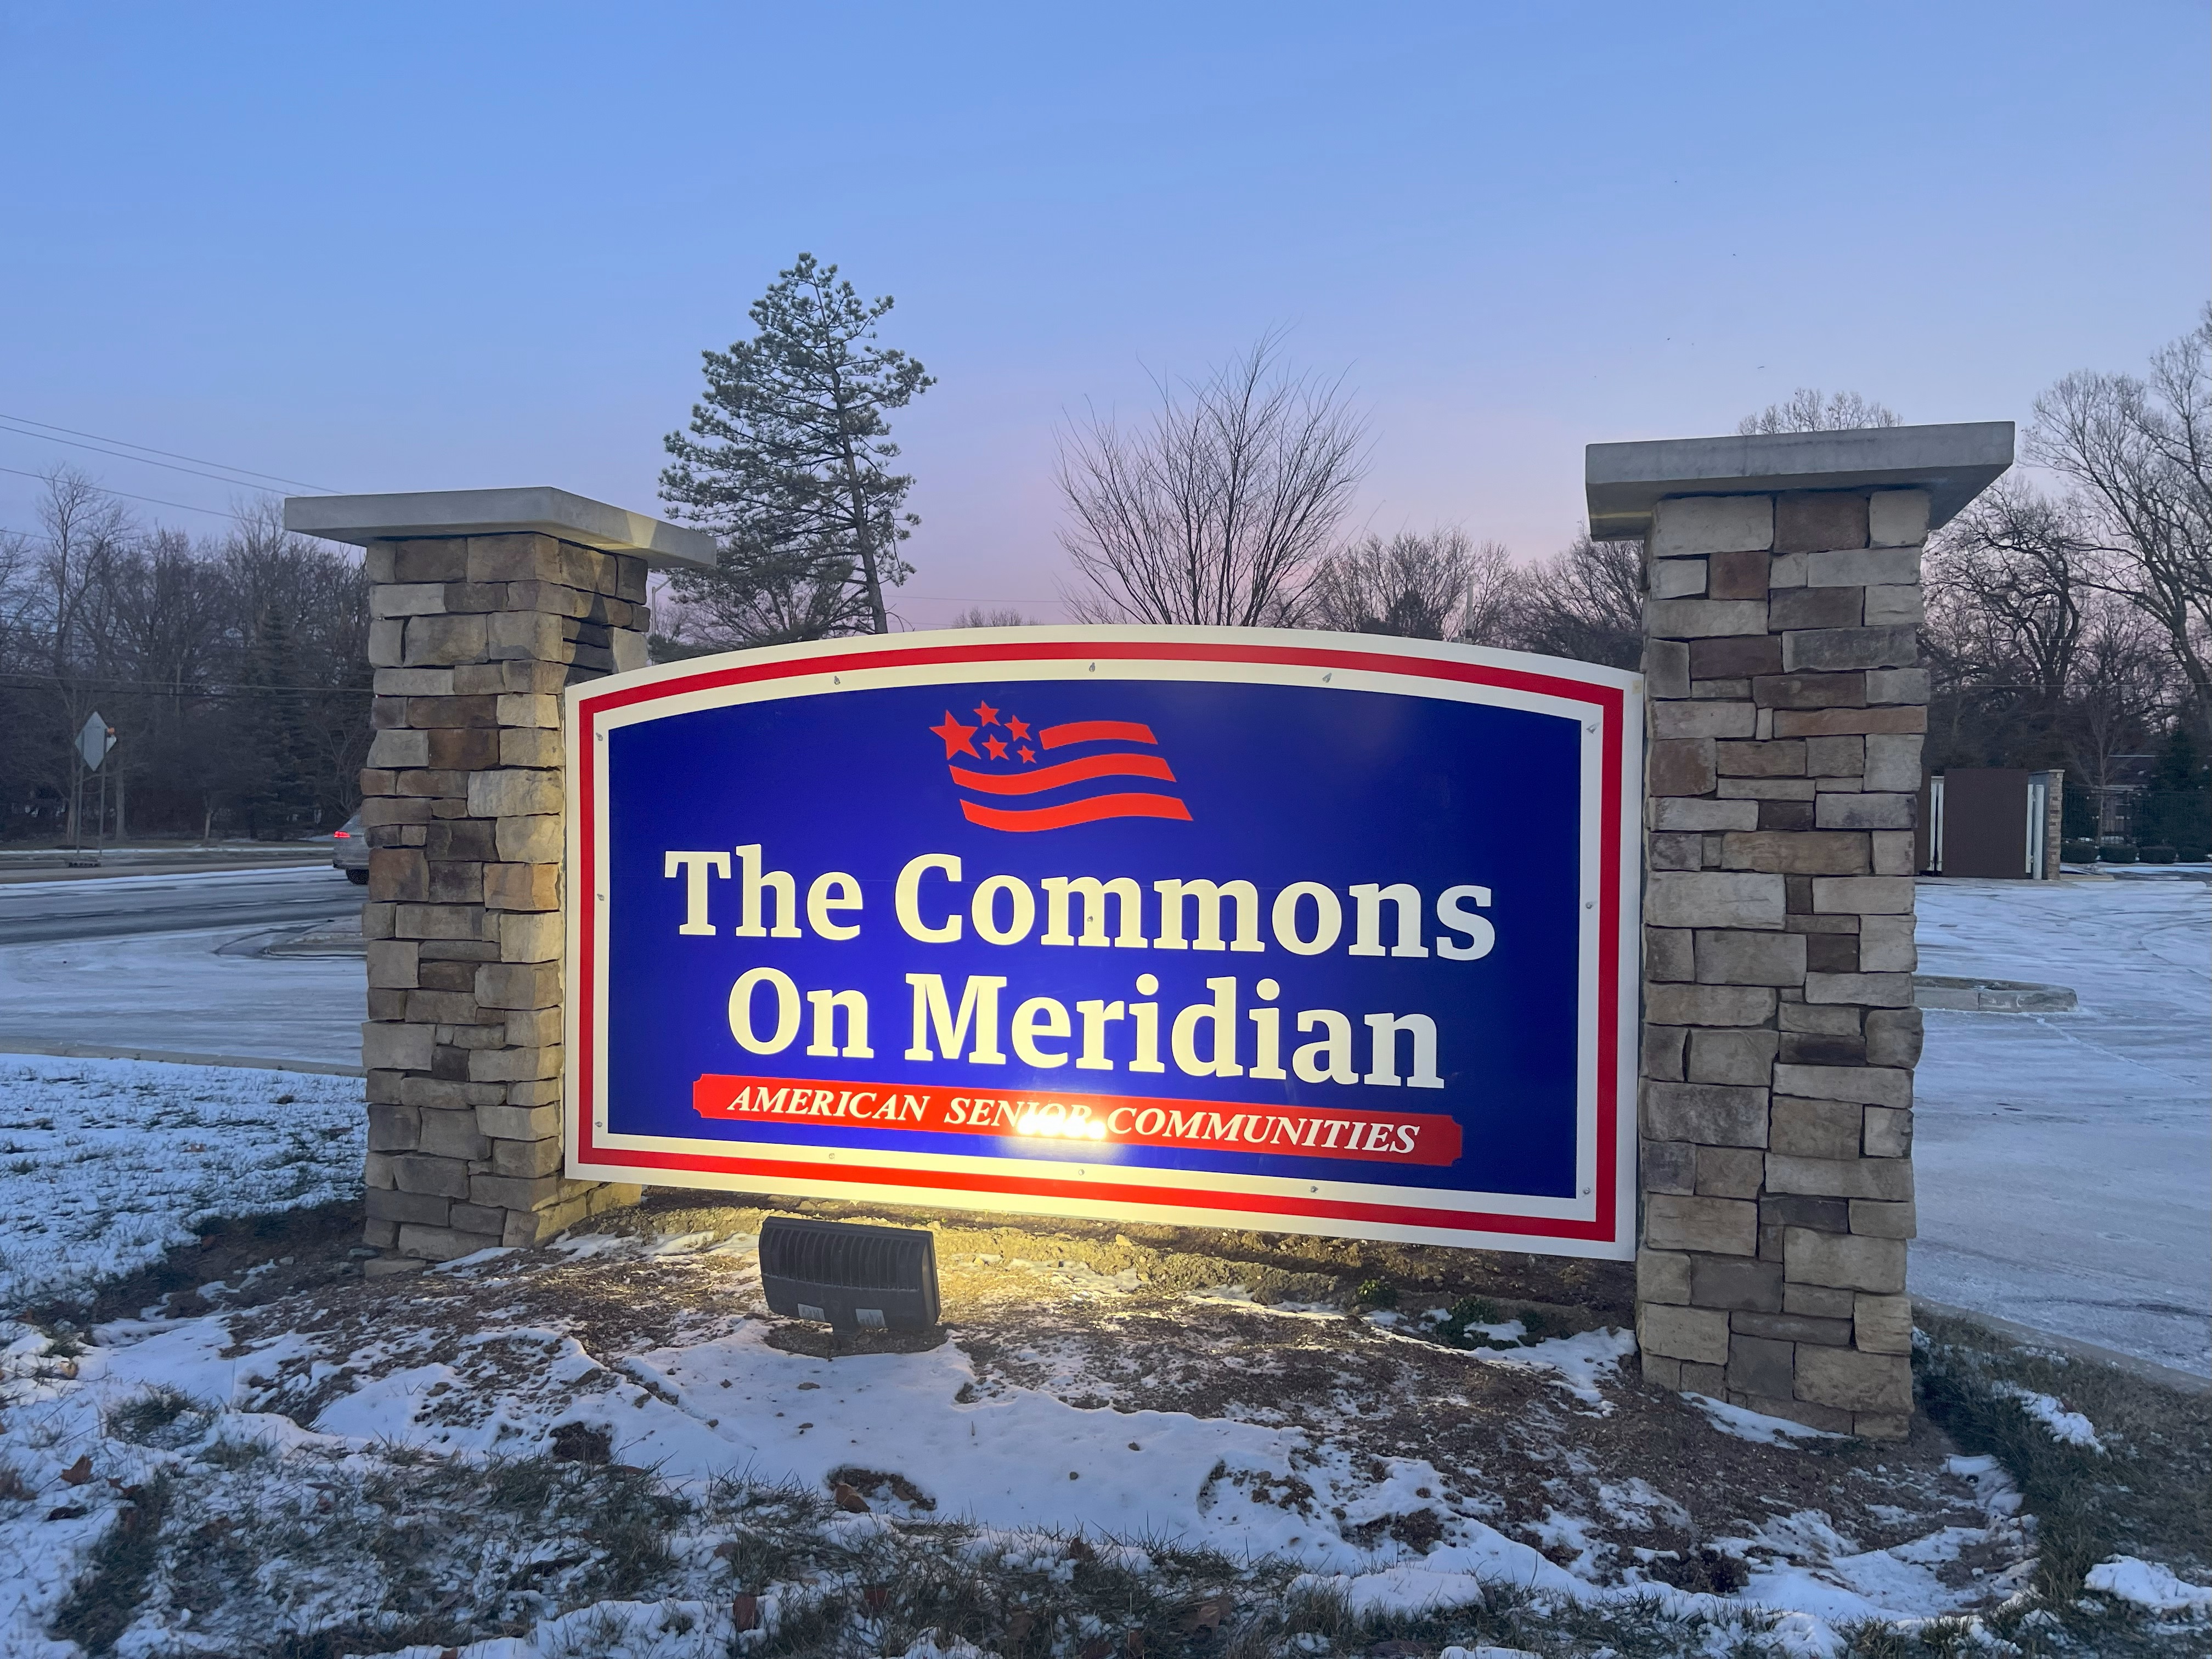 The Commons on Meridian image